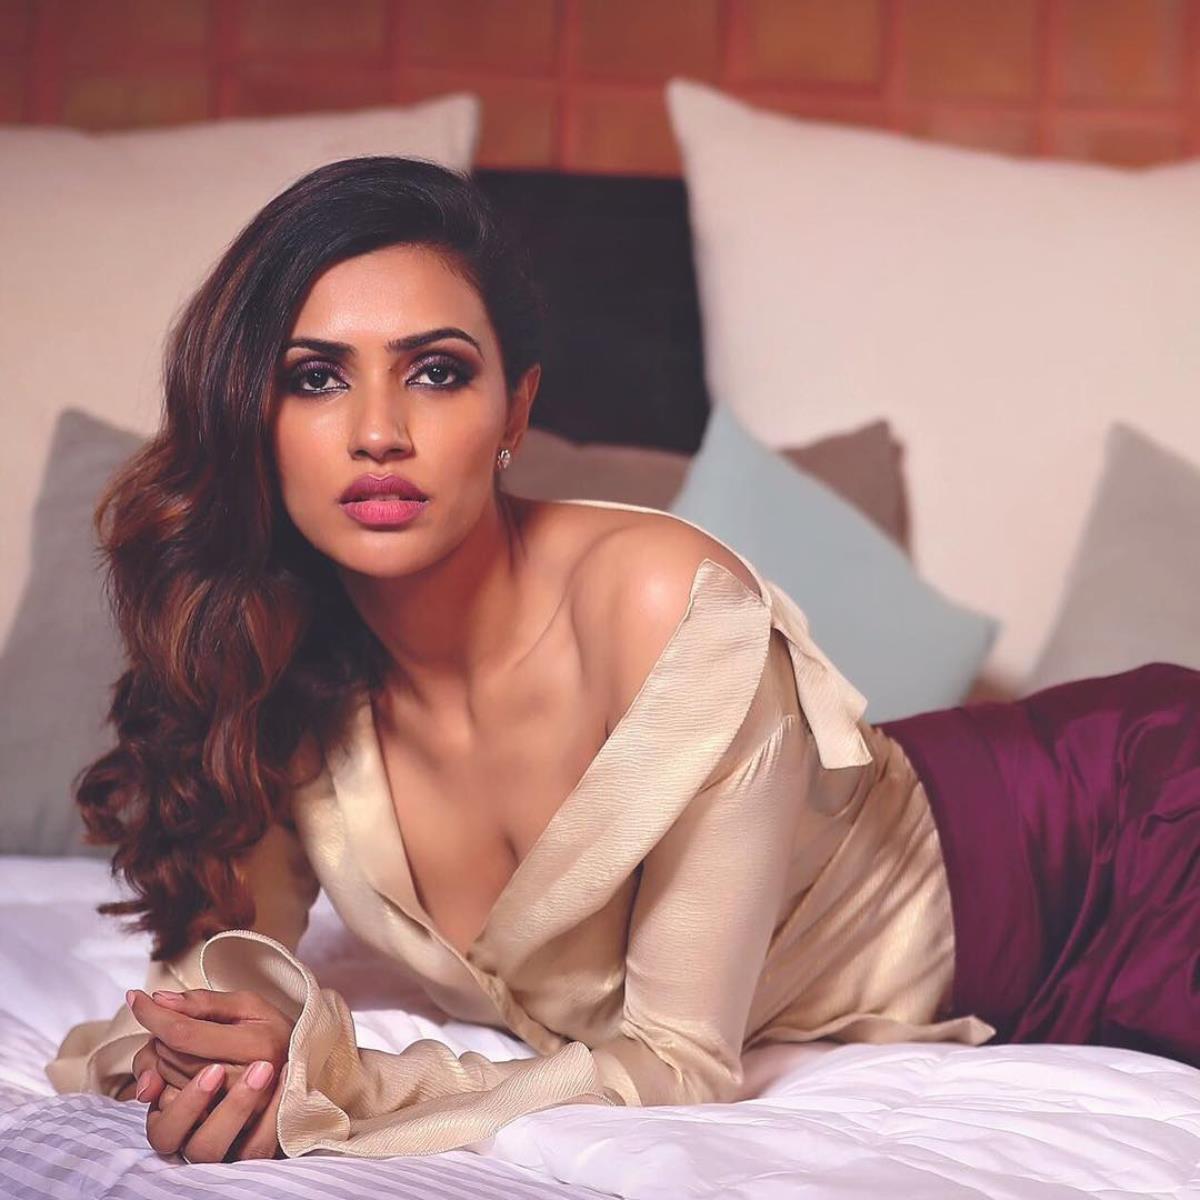 
Top 5 beautiful pics of <a class='inner-topic-link' href='/search/topic?searchType=search&searchTerm=AKSHARA GOWDA' target='_blank' title='akshara gowda-Latest Updates, Photos, Videos are a click away, CLICK NOW'>akshara gowda</a> 
